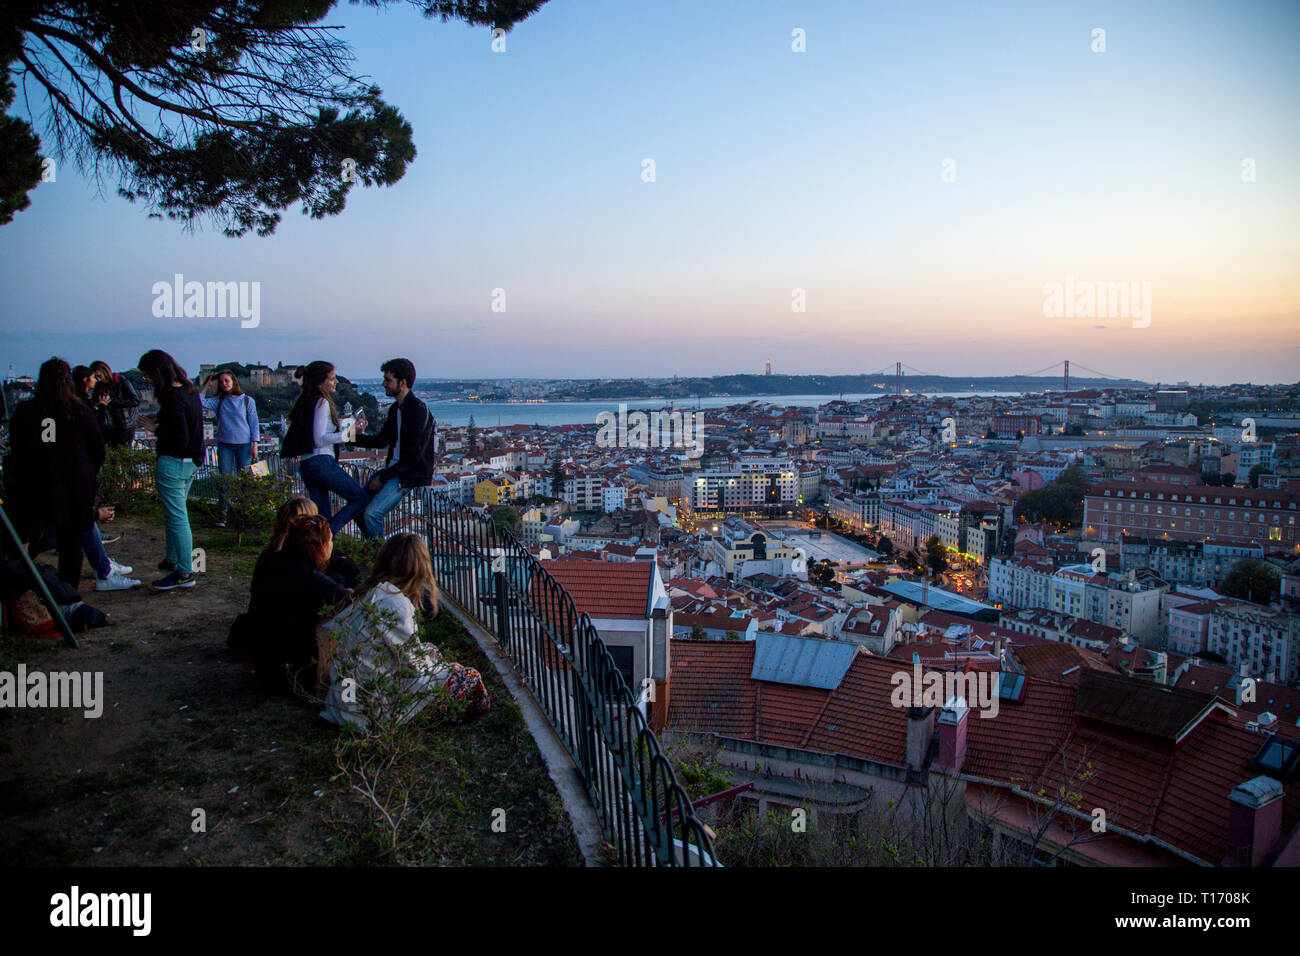 View of Lisbon from a hill at the sunset, with a group of young people Stock Photo